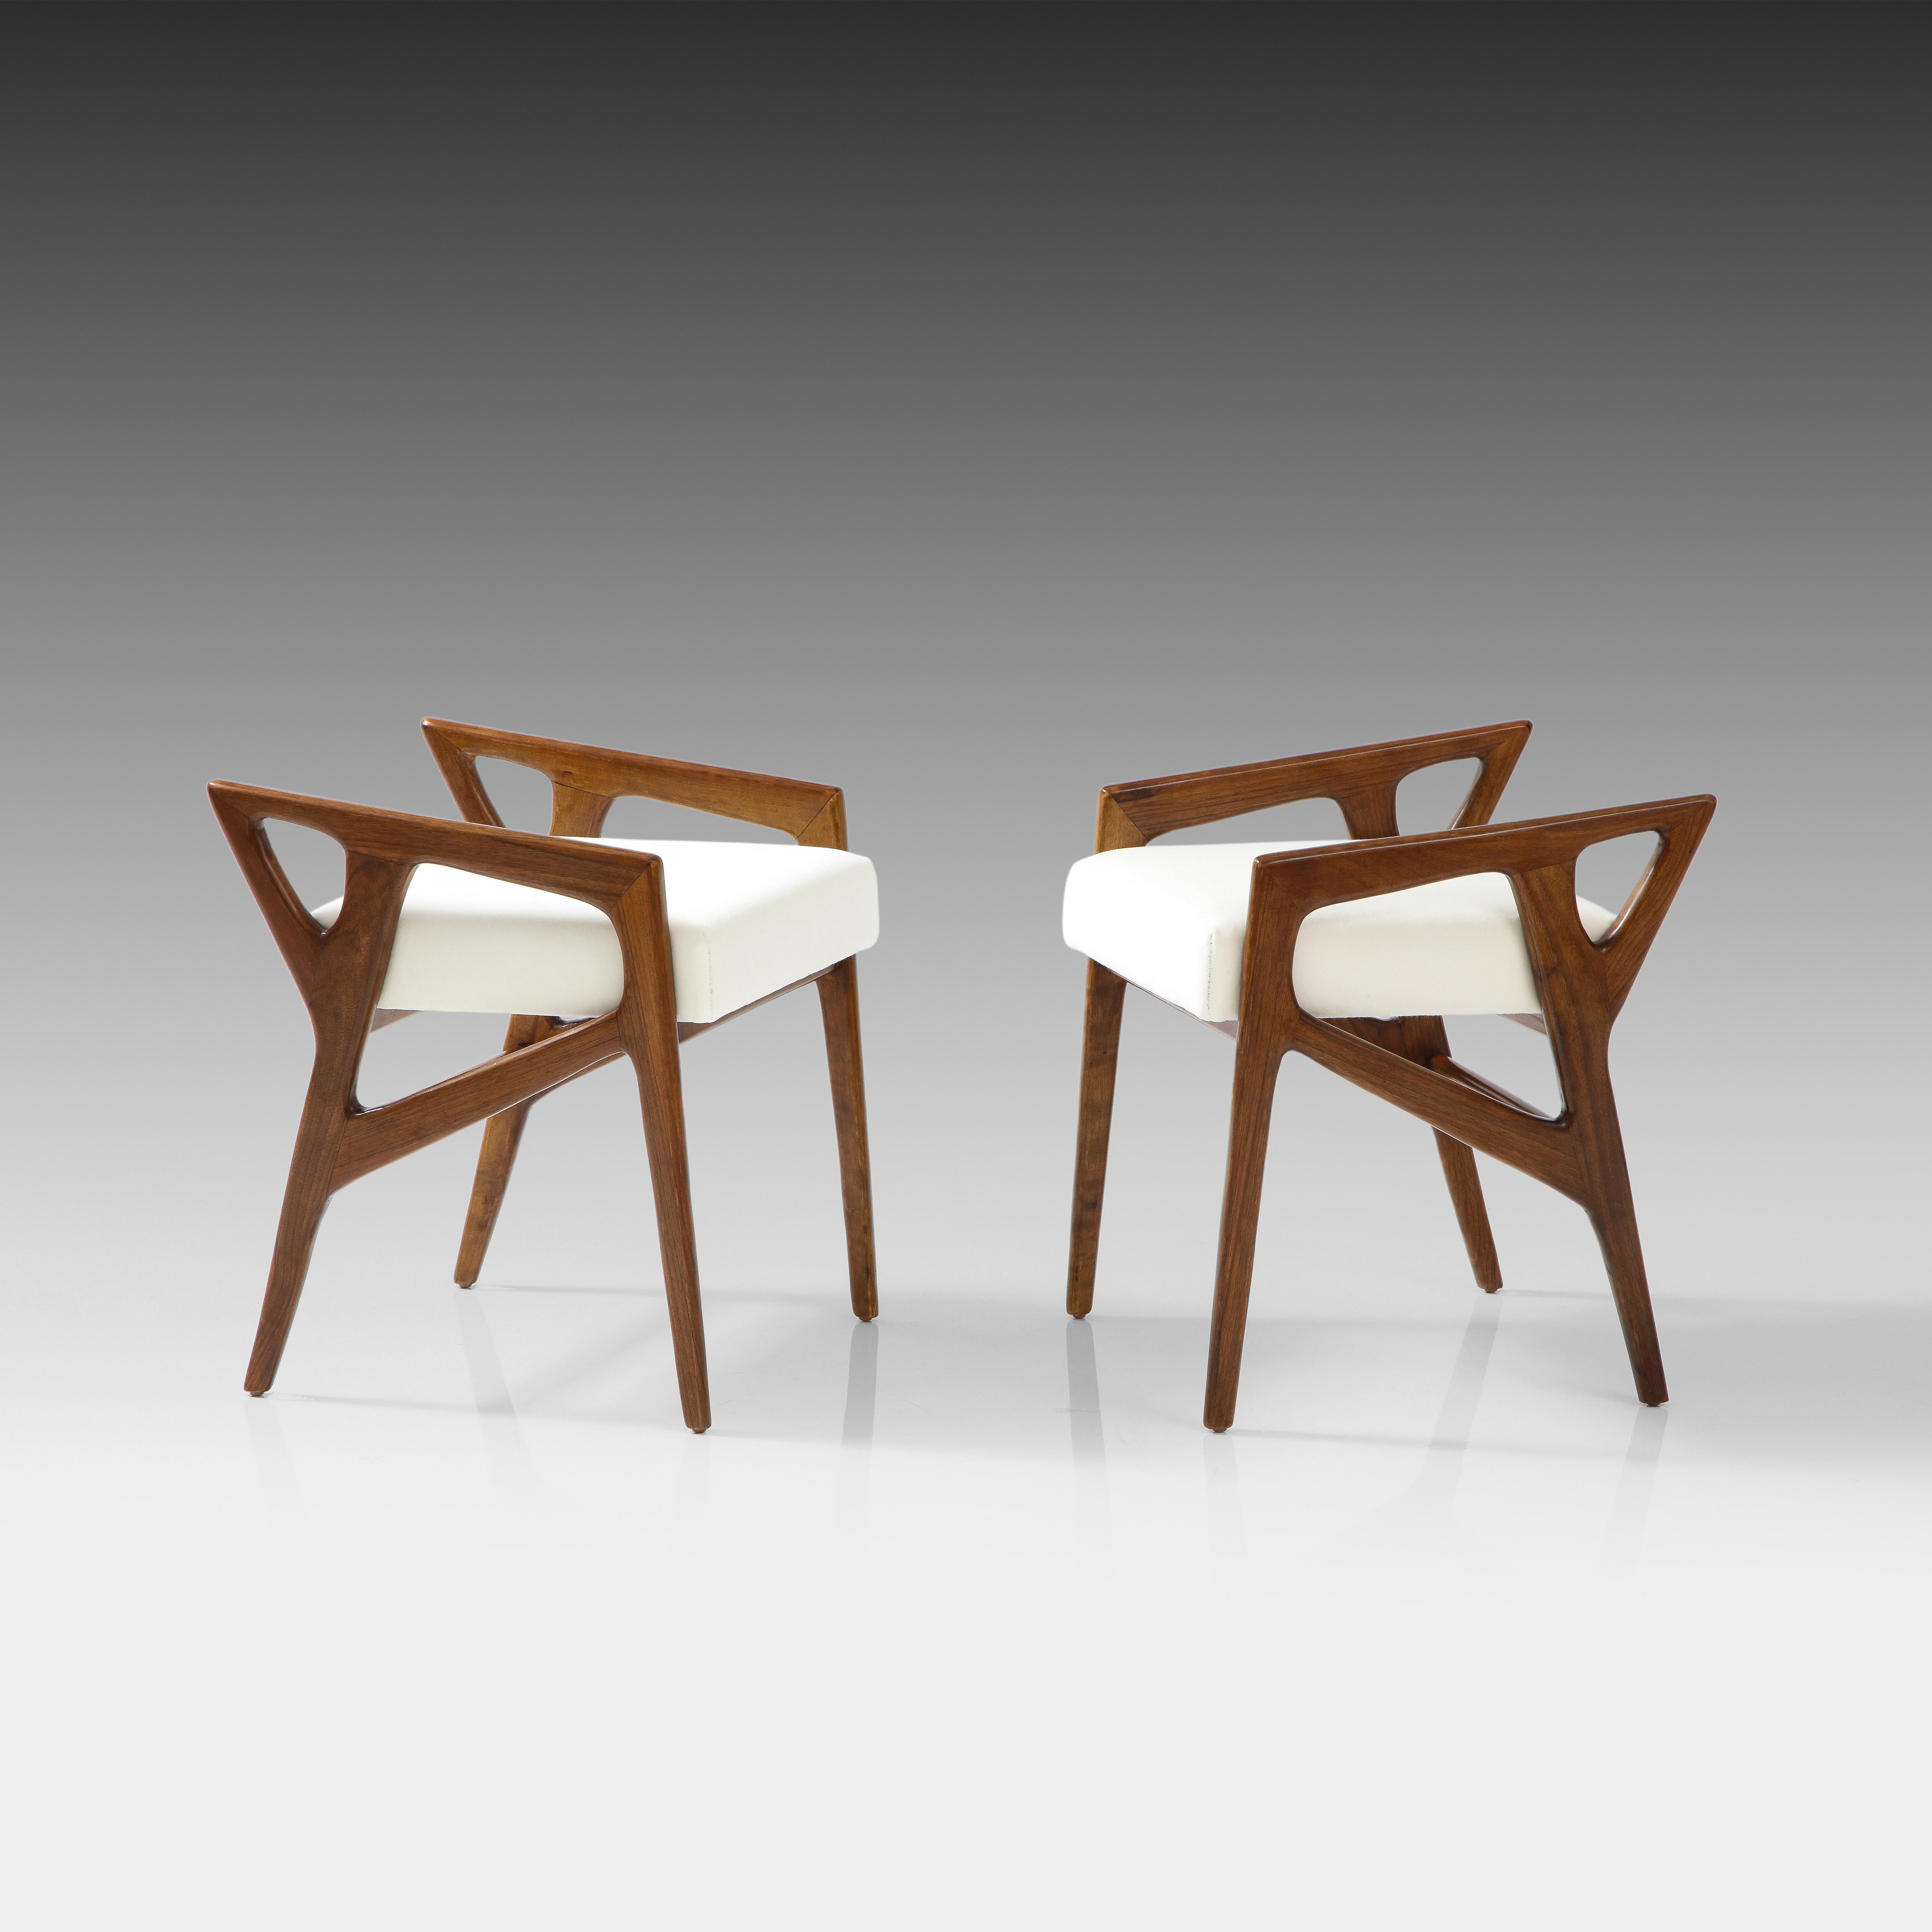 Gio Ponti for Cassina rare pair of sculptural walnut stools, Italy, 1950s. These iconic Ponti stools are an architectural and incredibly chic design which have been restored and reupholstered in a luxurious Holland and Sherry Primo White or ivory